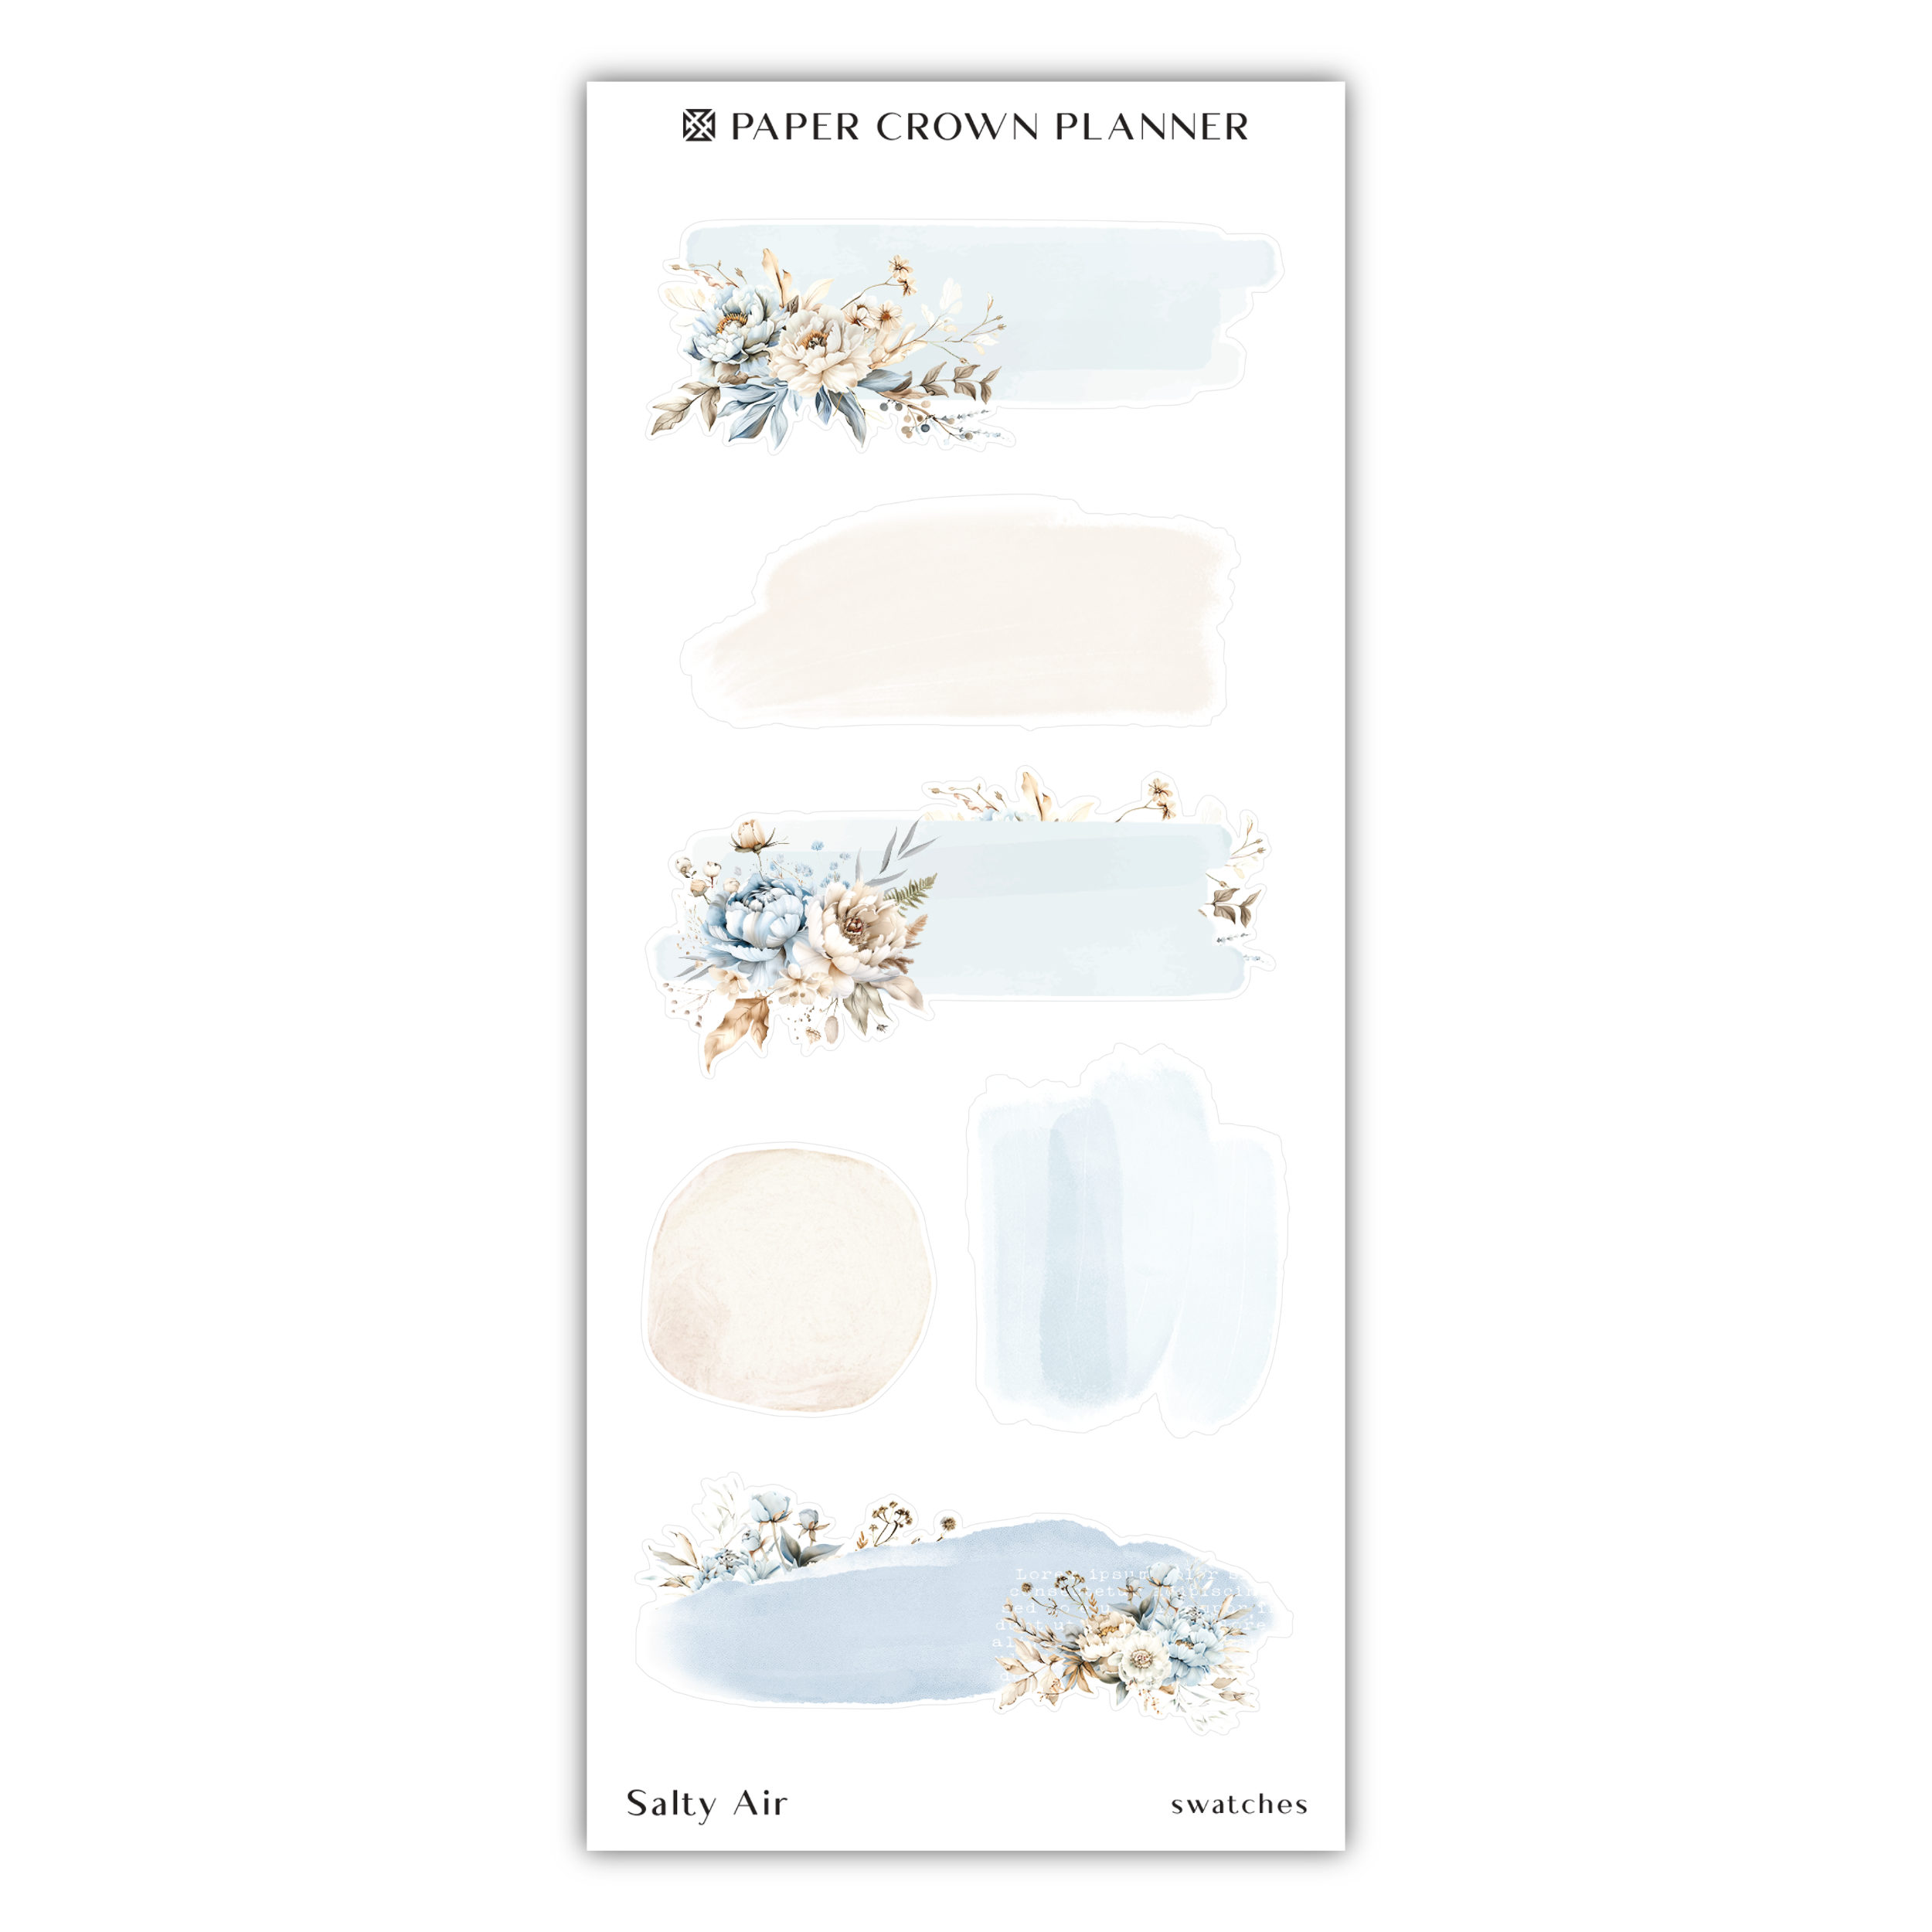 a sticker sheet with flowers on it